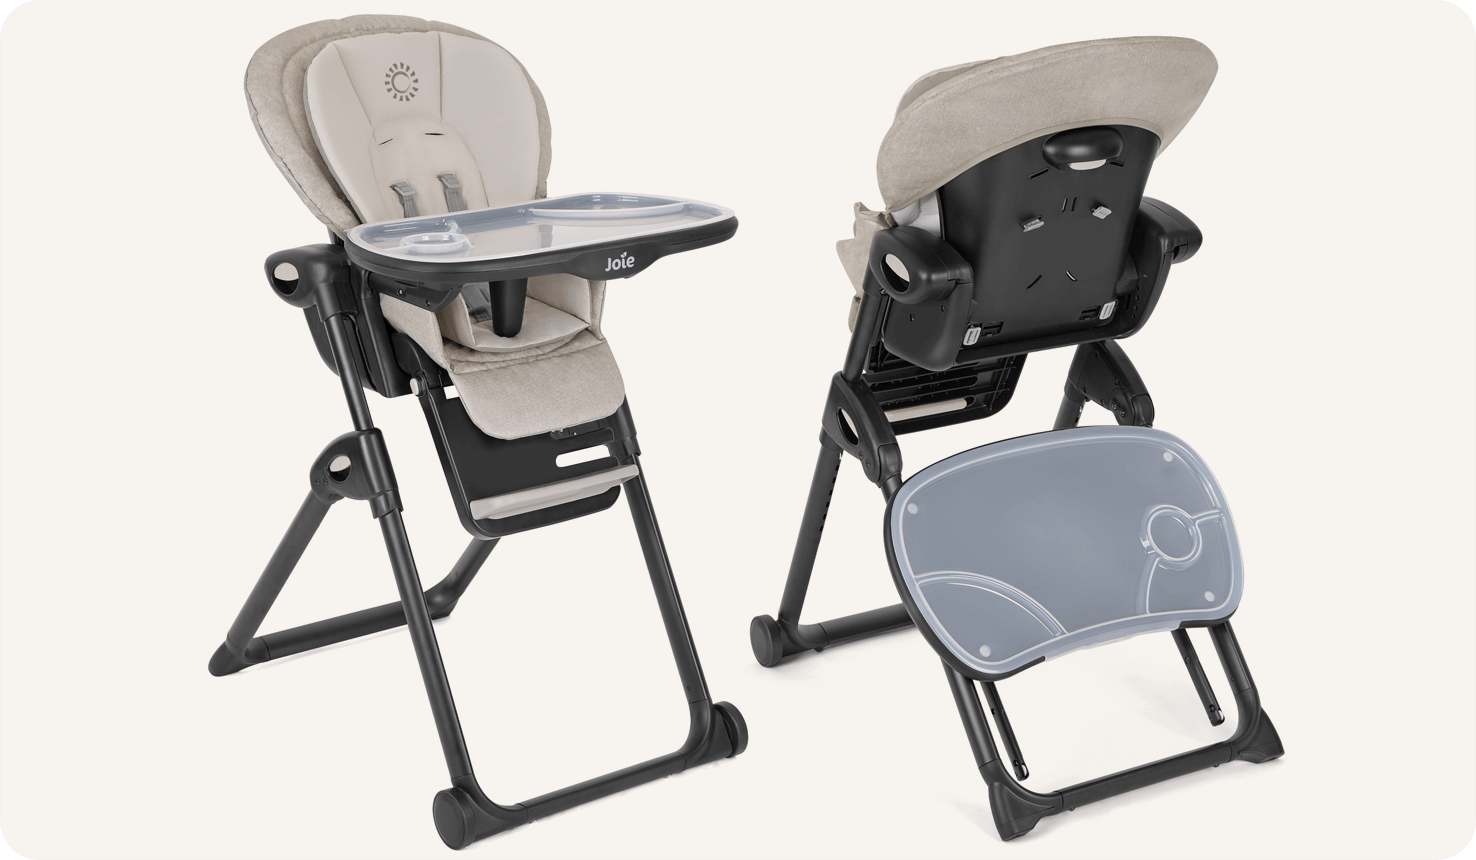 Two Mimzy Recline highchairs shown at an angle: the chair on the left facing forward with tray attached, and chair on the right facing backward with the tray stored on the back legs.